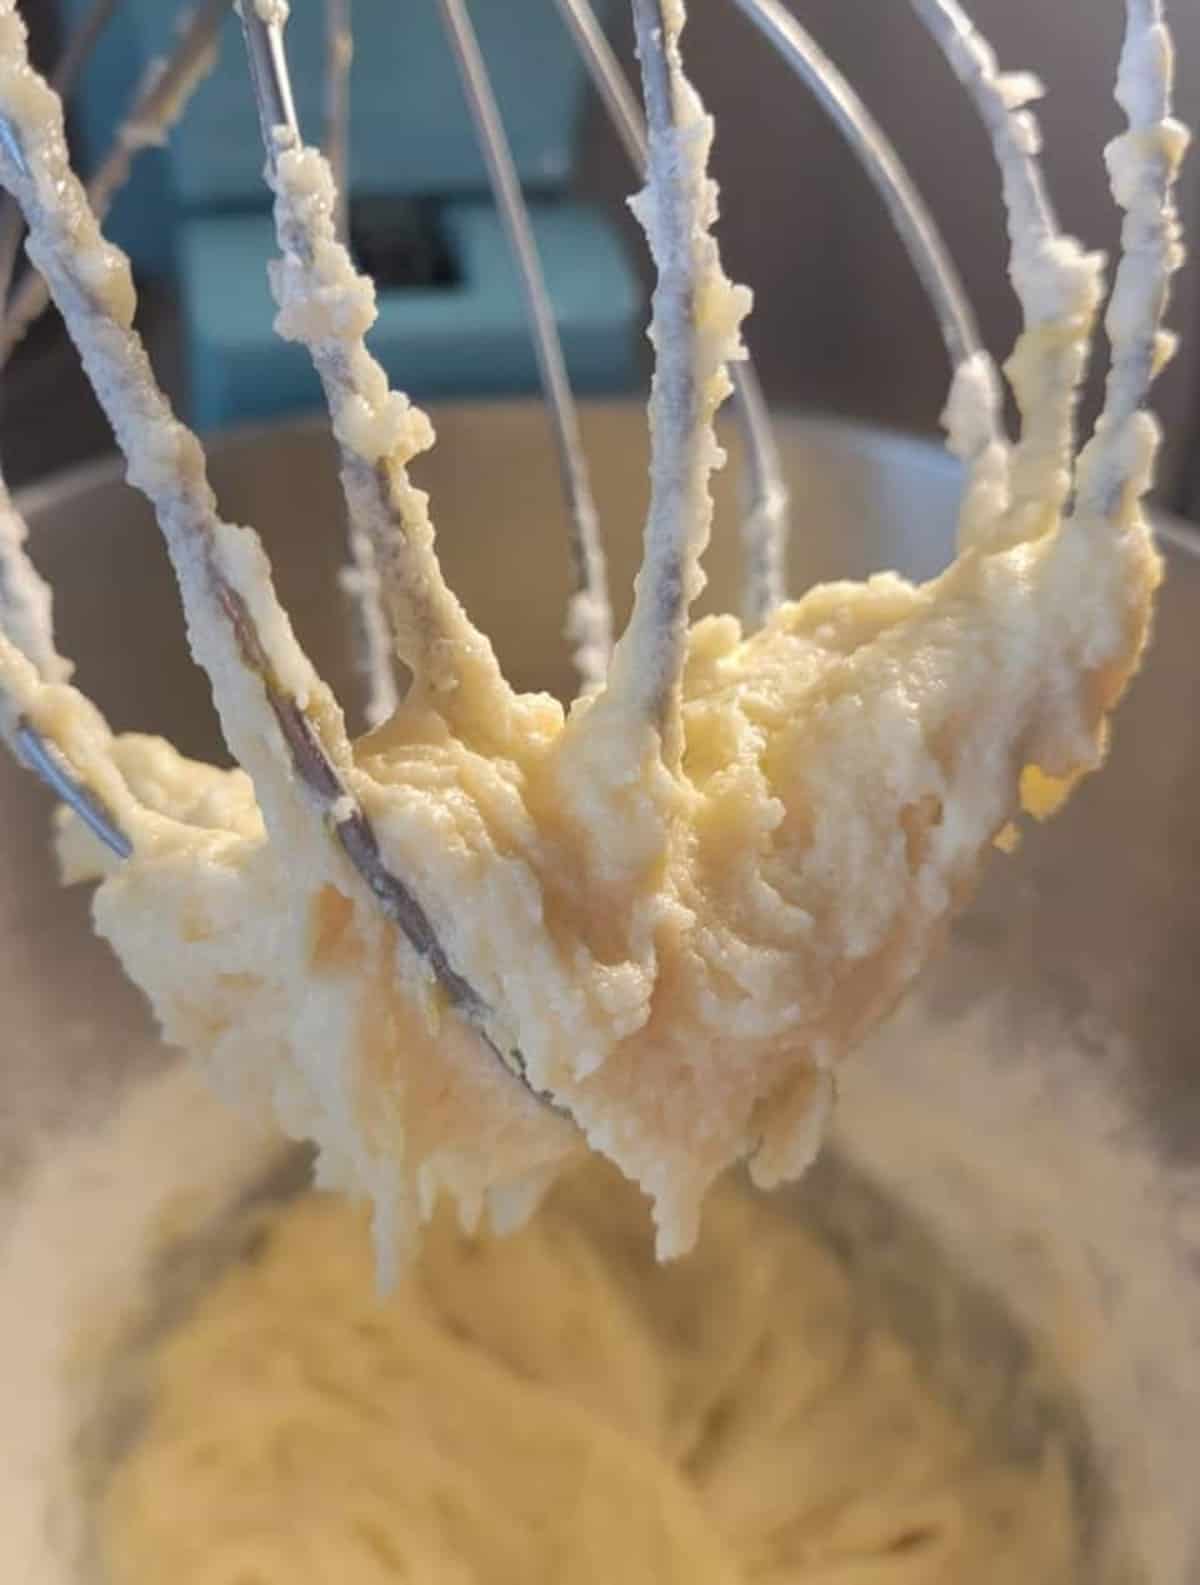 close up of whip attachment, showing mixed batter